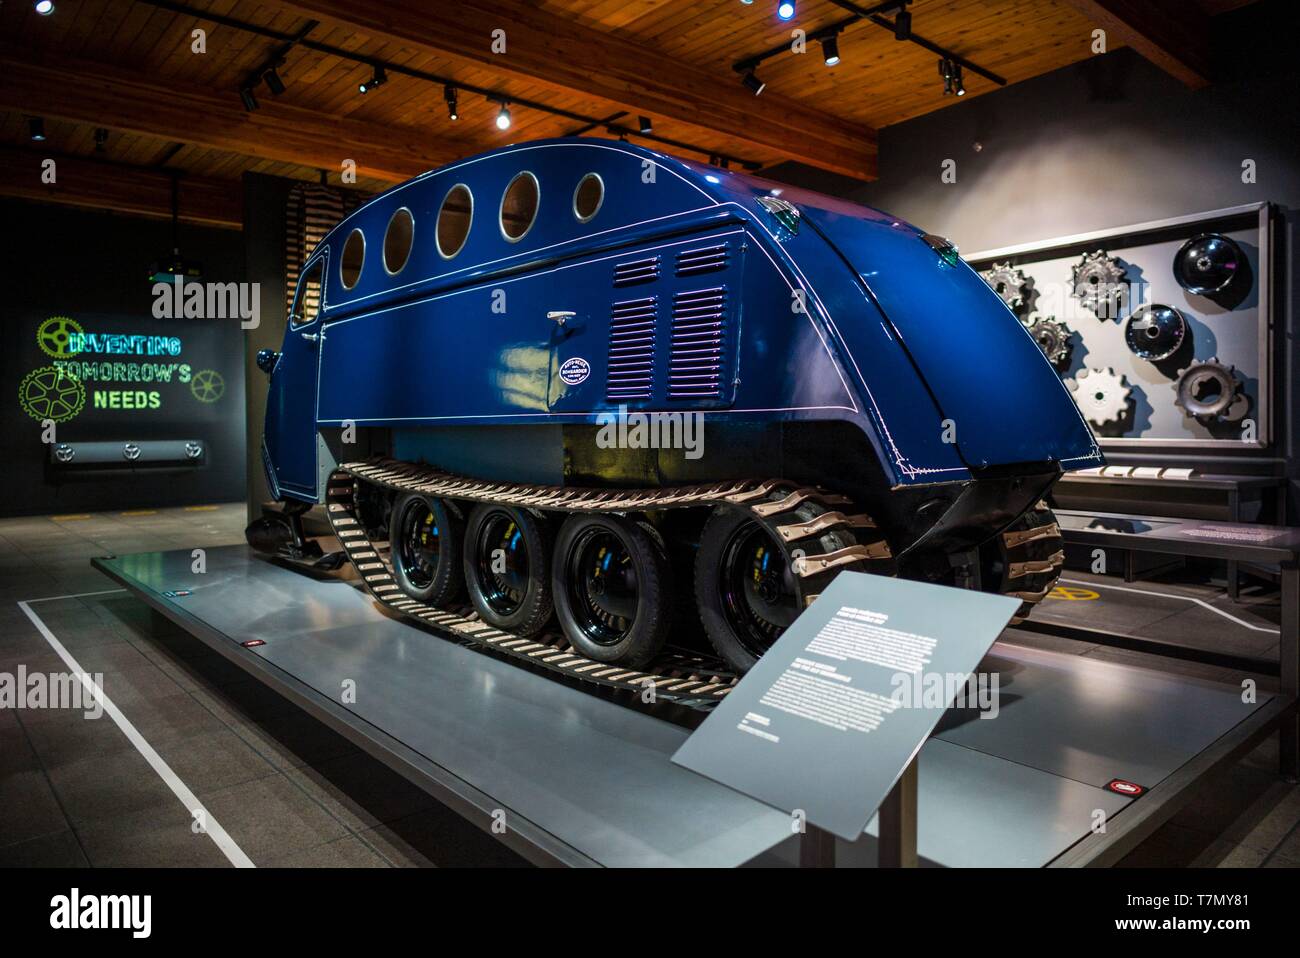 Canada, Quebec, Estrie Region, Valcourt, Musee J Armand Bombardier, museum dedicated to the inventor of the modern snowmobile, early snowmobile prototype Stock Photo